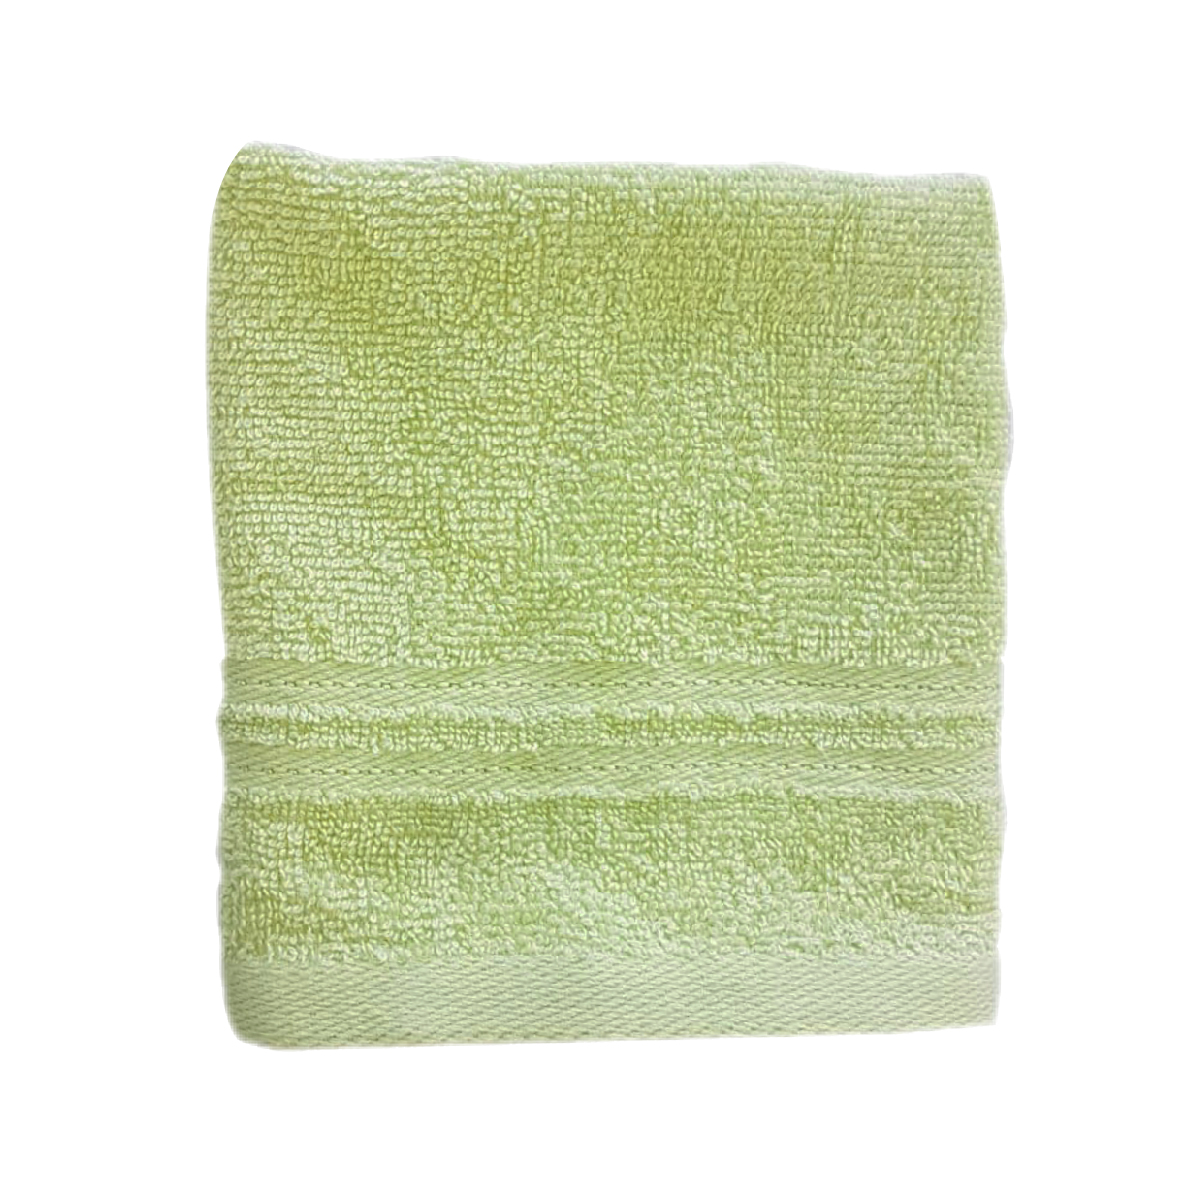 Coventry Bath Towel, 1 Piece 30x30cm 100% Cotton Available in Colors